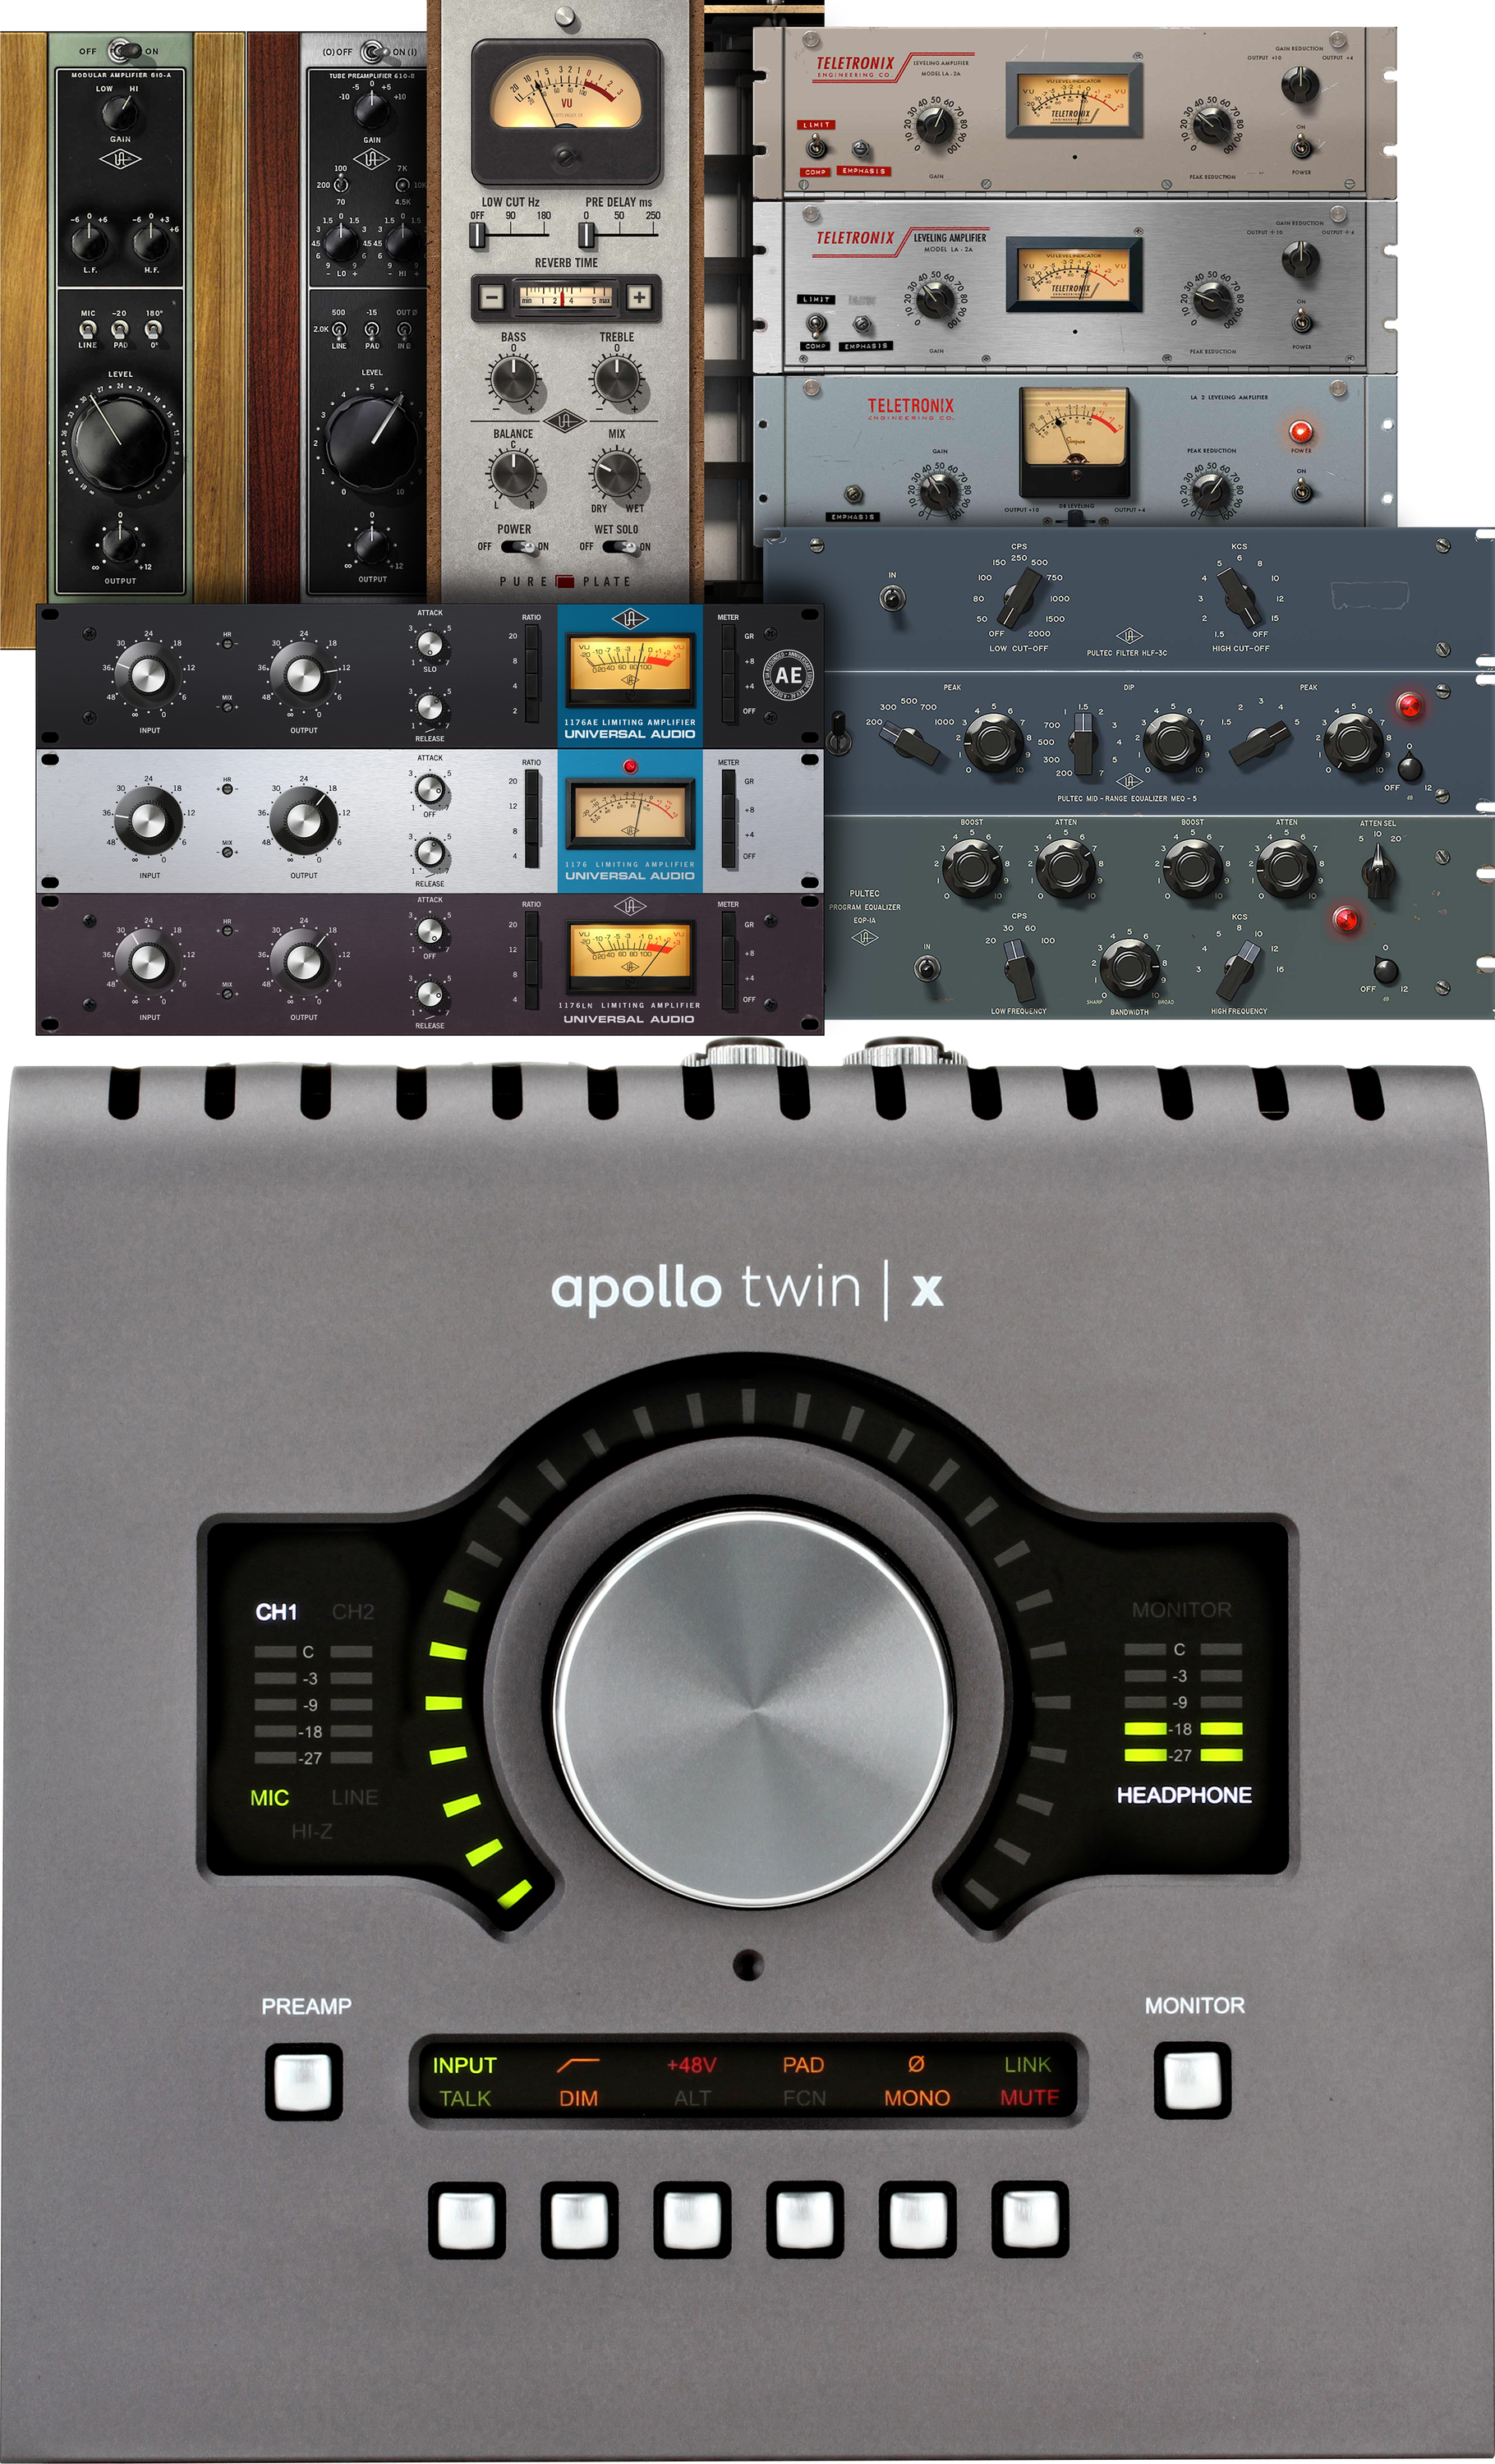 Bundled Item: Universal Audio Apollo Twin X DUO Heritage Edition 10x6 Thunderbolt Audio Interface with UAD DSP